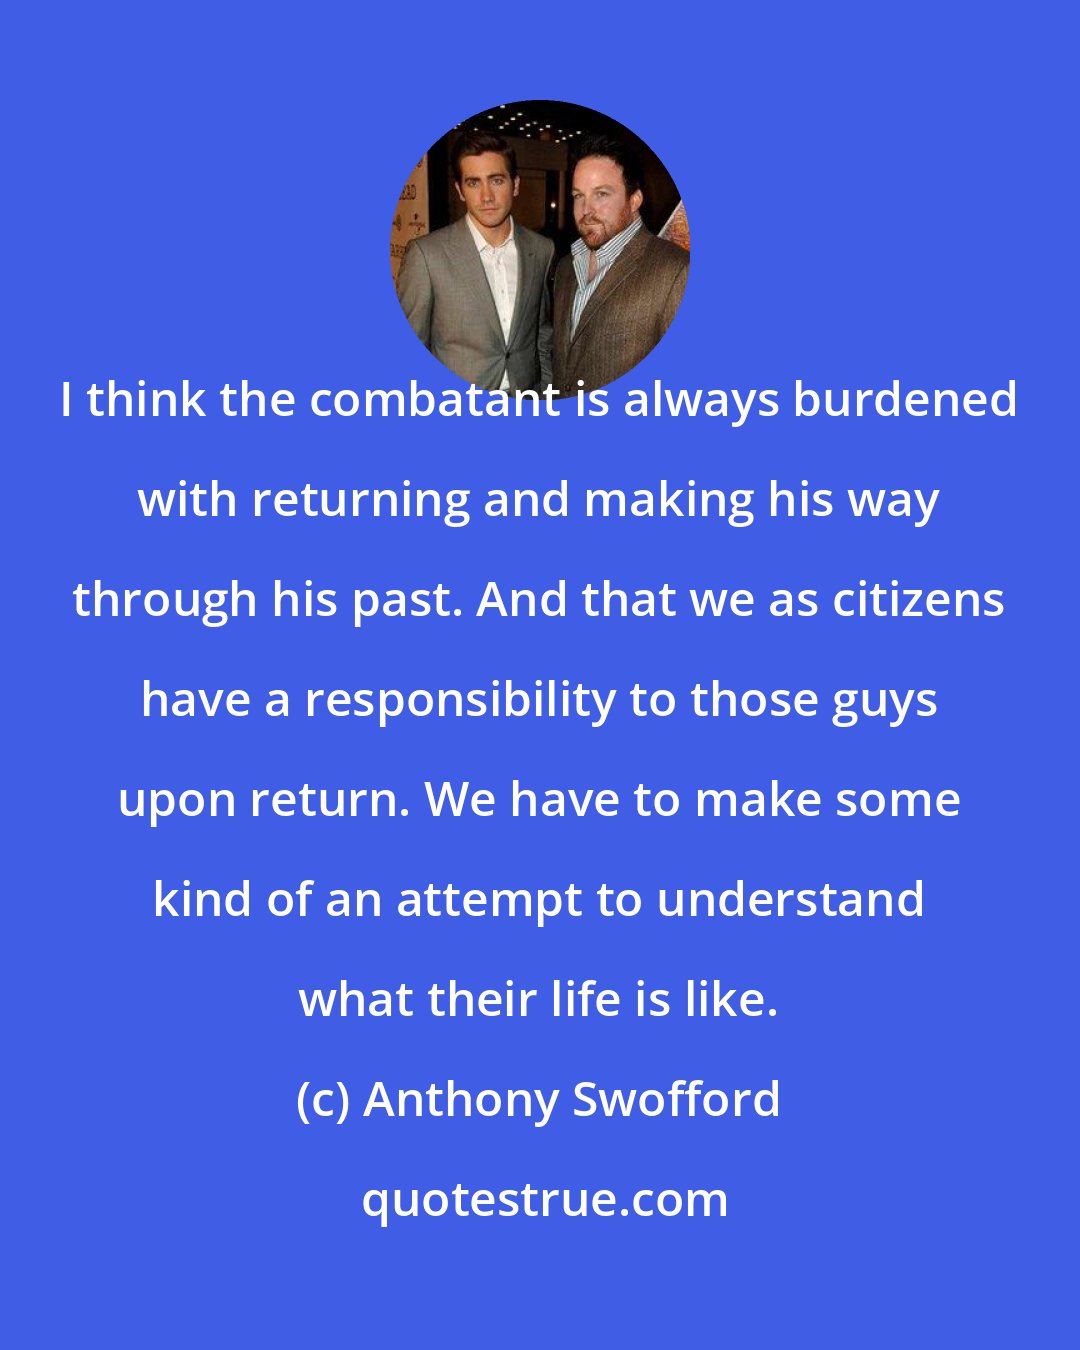 Anthony Swofford: I think the combatant is always burdened with returning and making his way through his past. And that we as citizens have a responsibility to those guys upon return. We have to make some kind of an attempt to understand what their life is like.